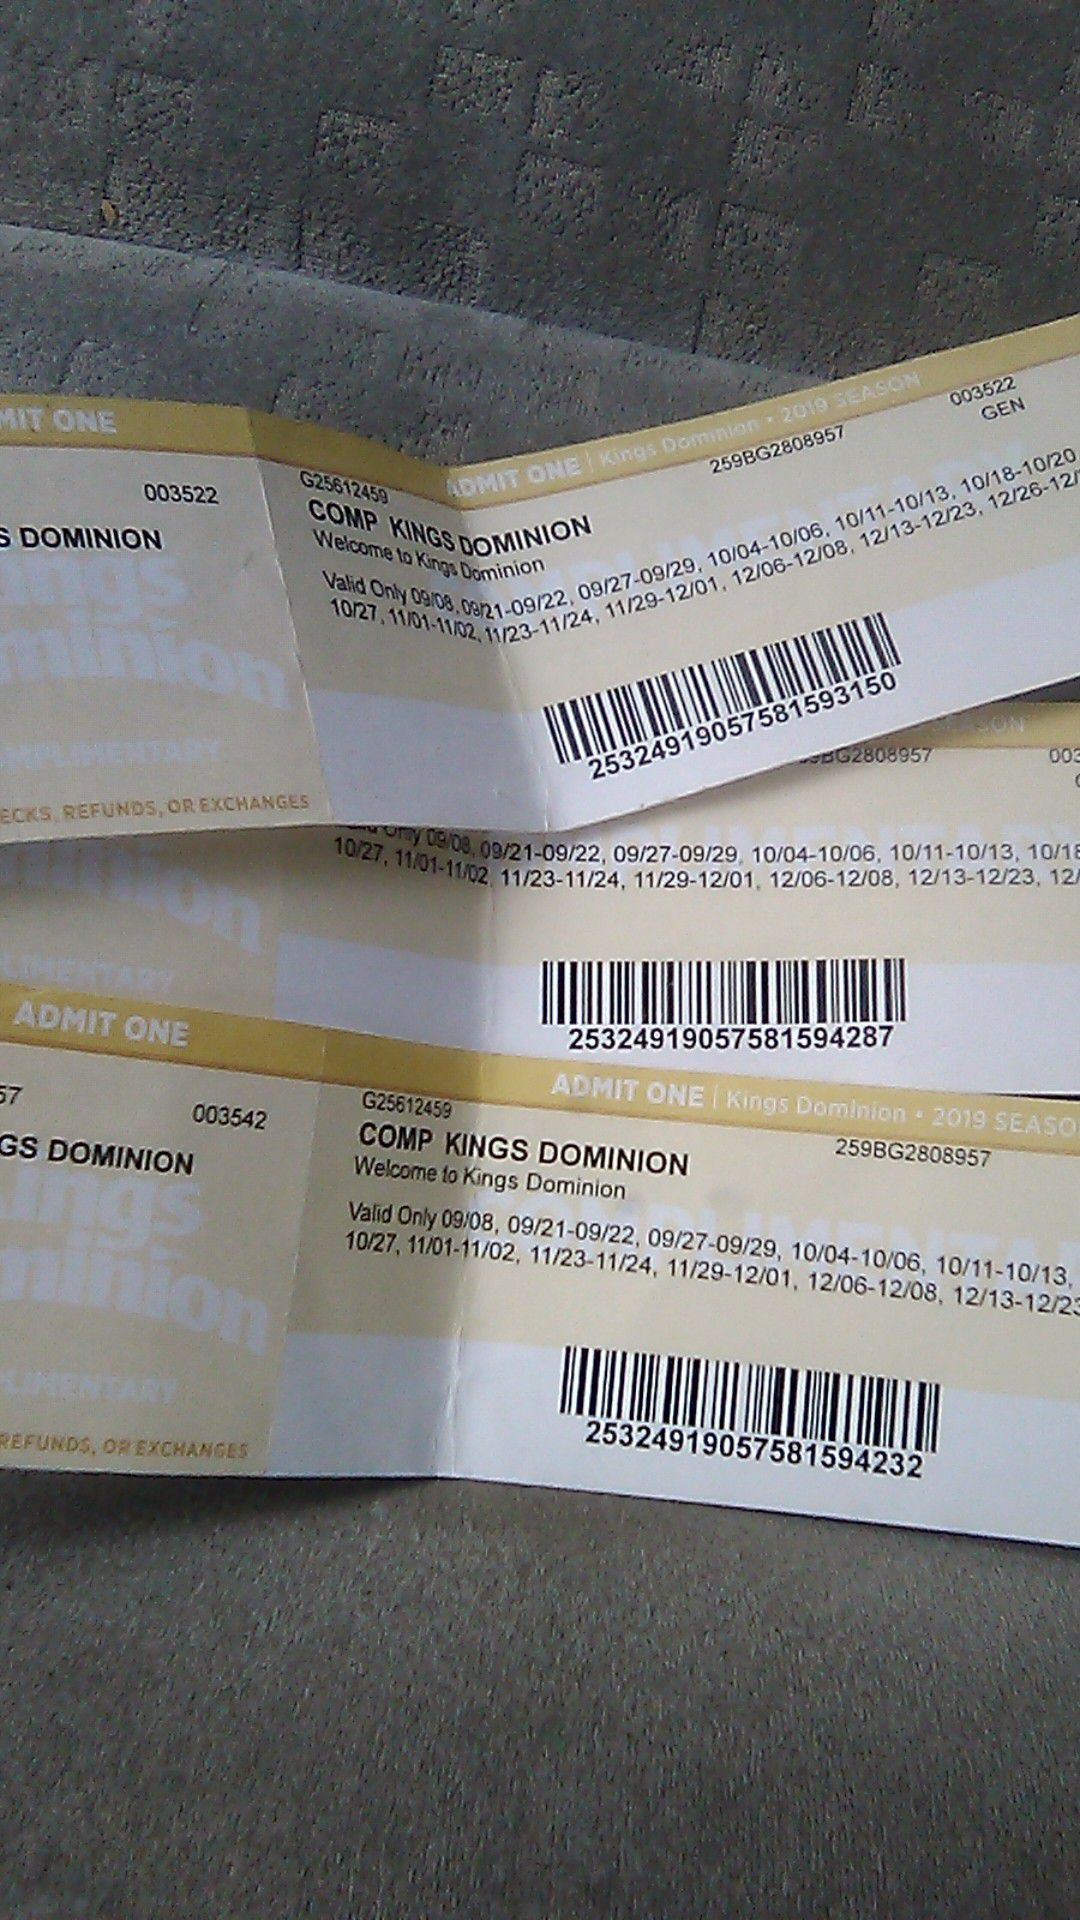 3 Kings Dominion Tickets Have more if needed